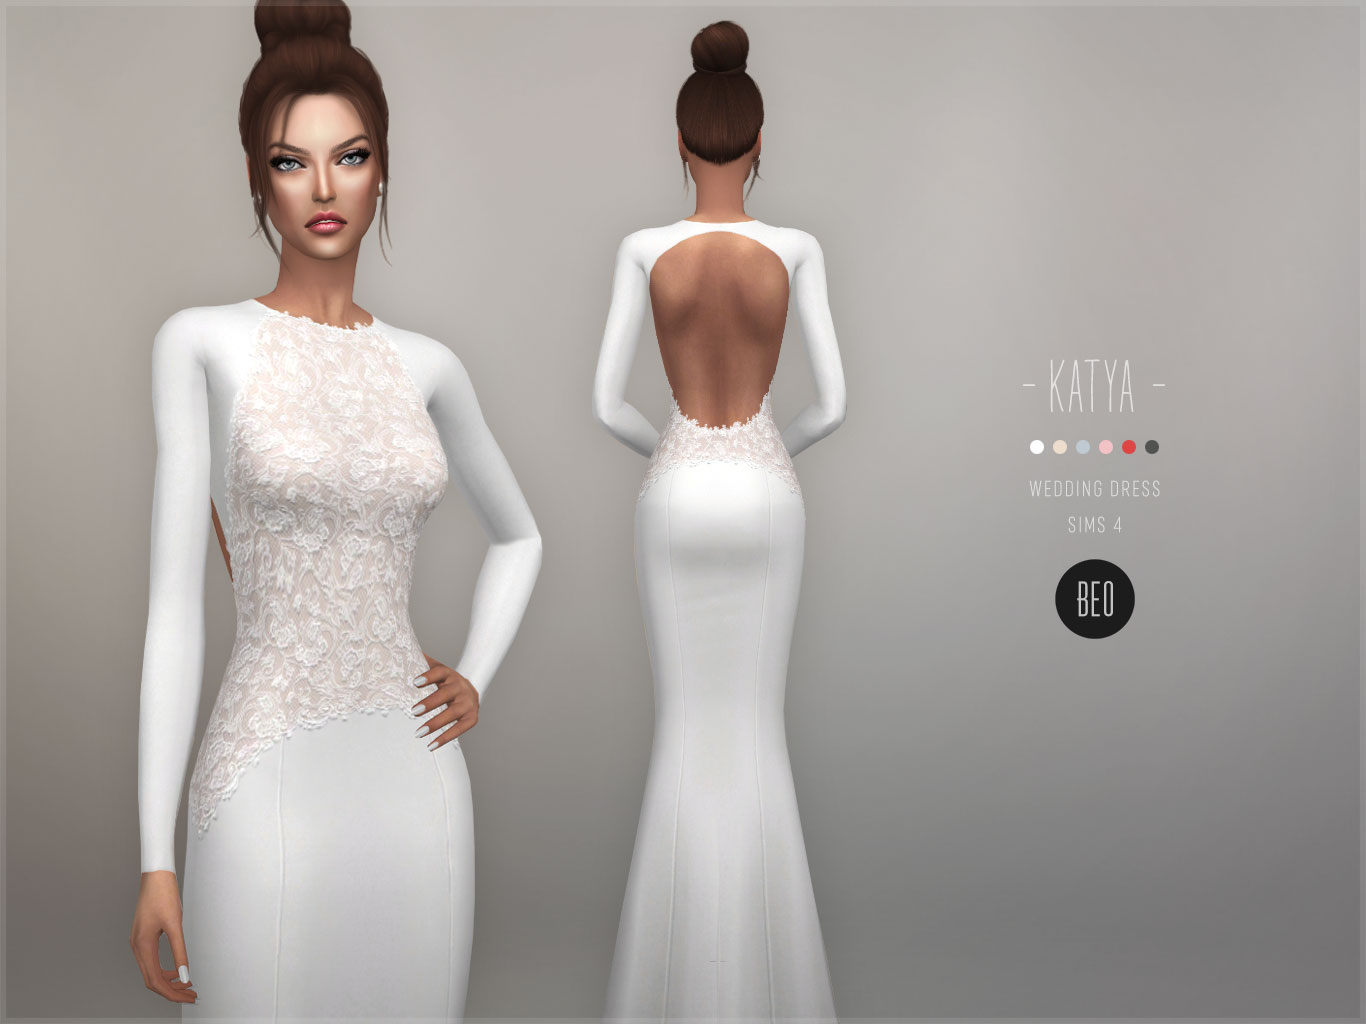 Wedding dress - Katya for The Sims 4 by BEO